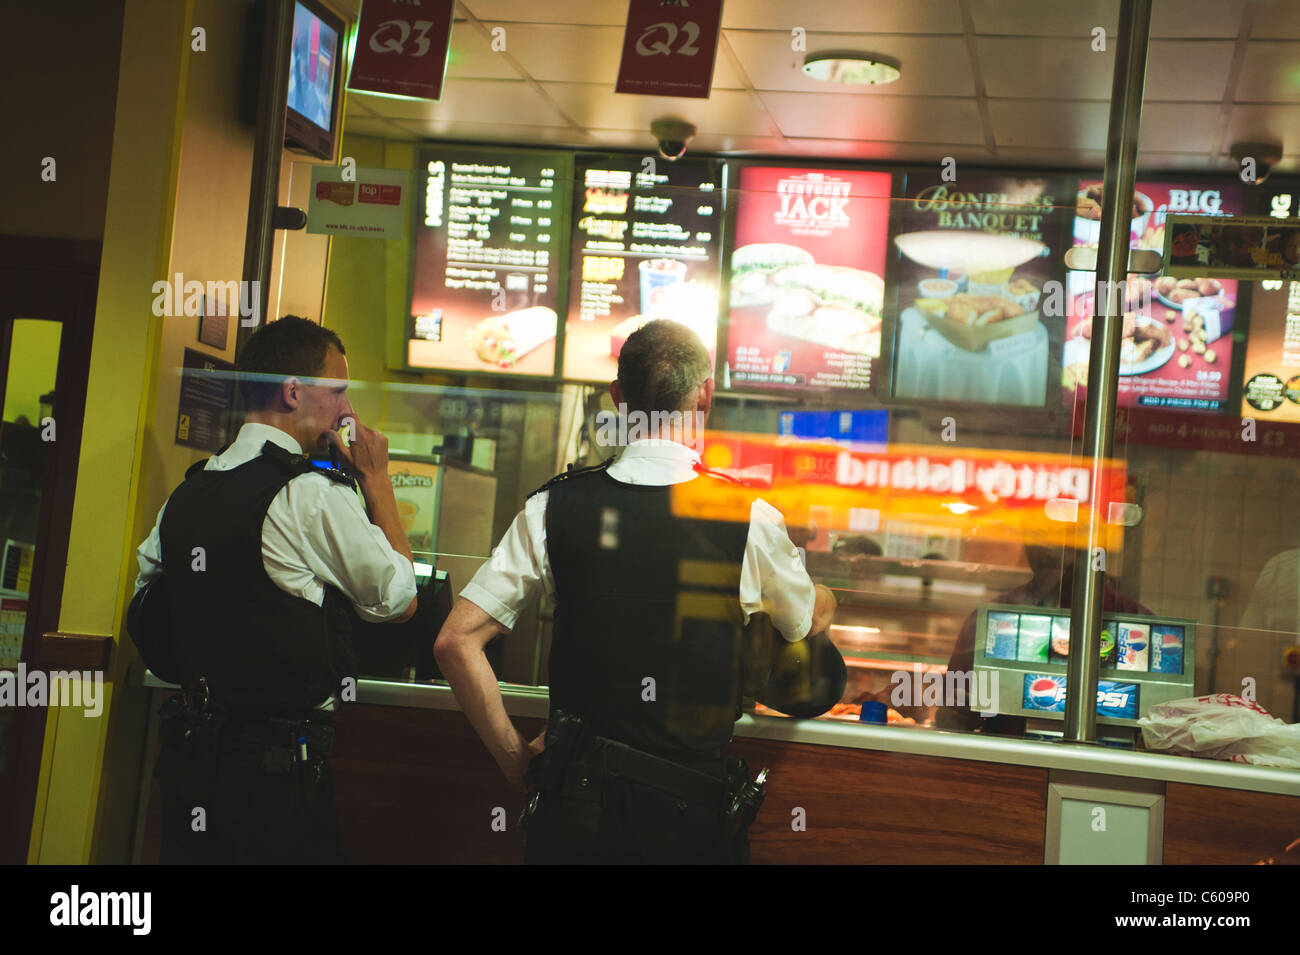 Police taking a break in the KFC during the London Riots. Stock Photo